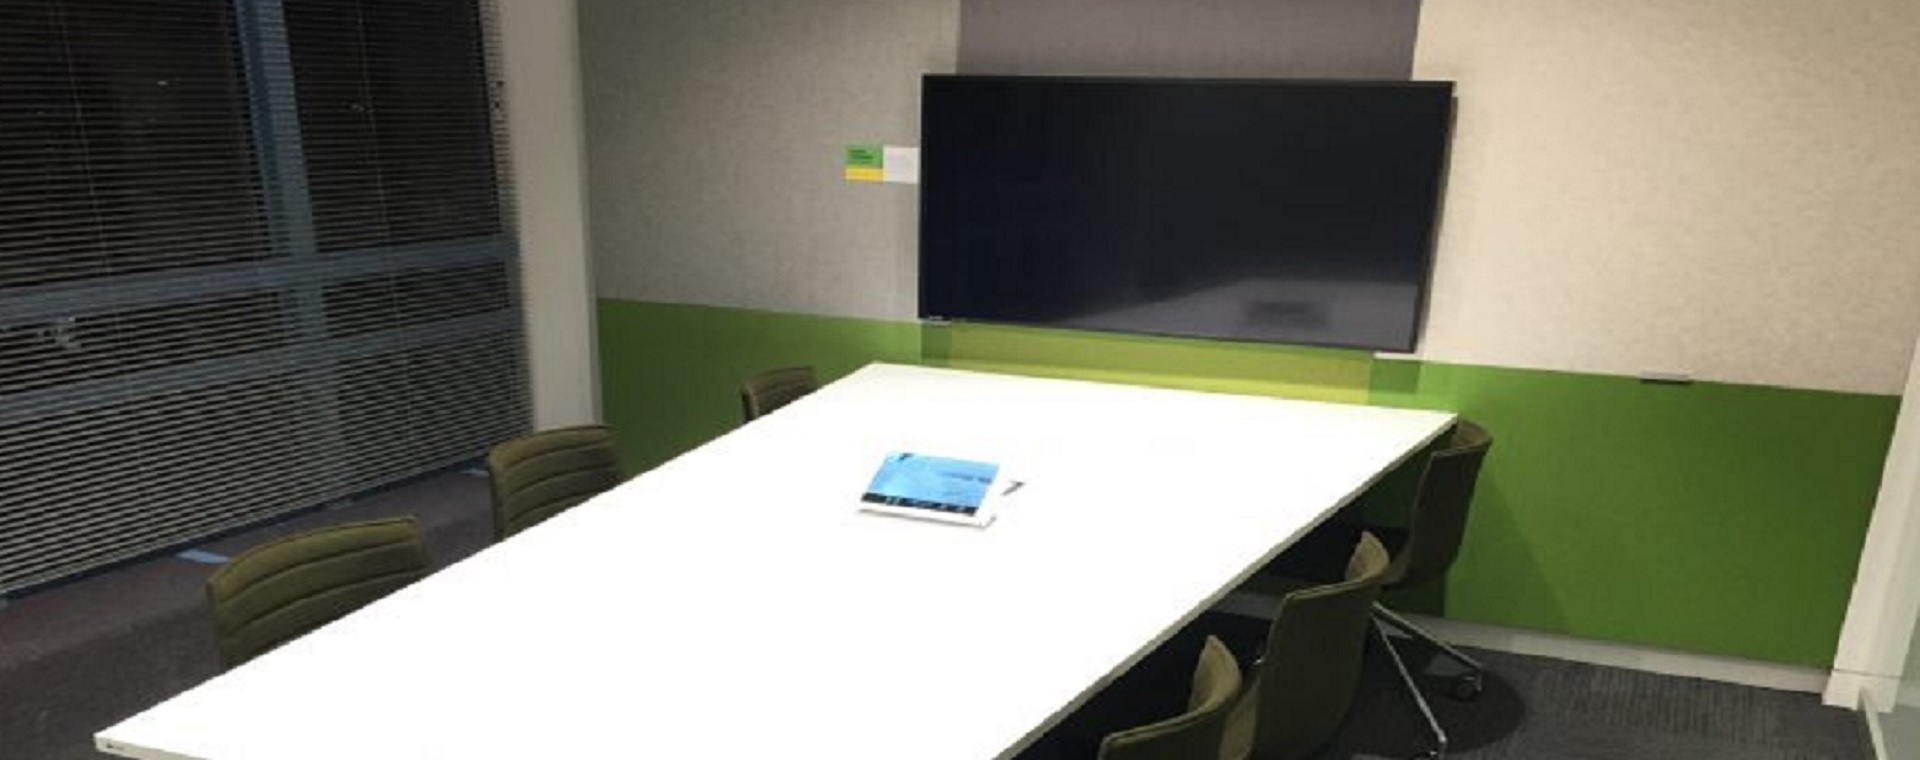 Fonterra Experience Centre meeting room with touchscreen on the desk and large display scrfeen